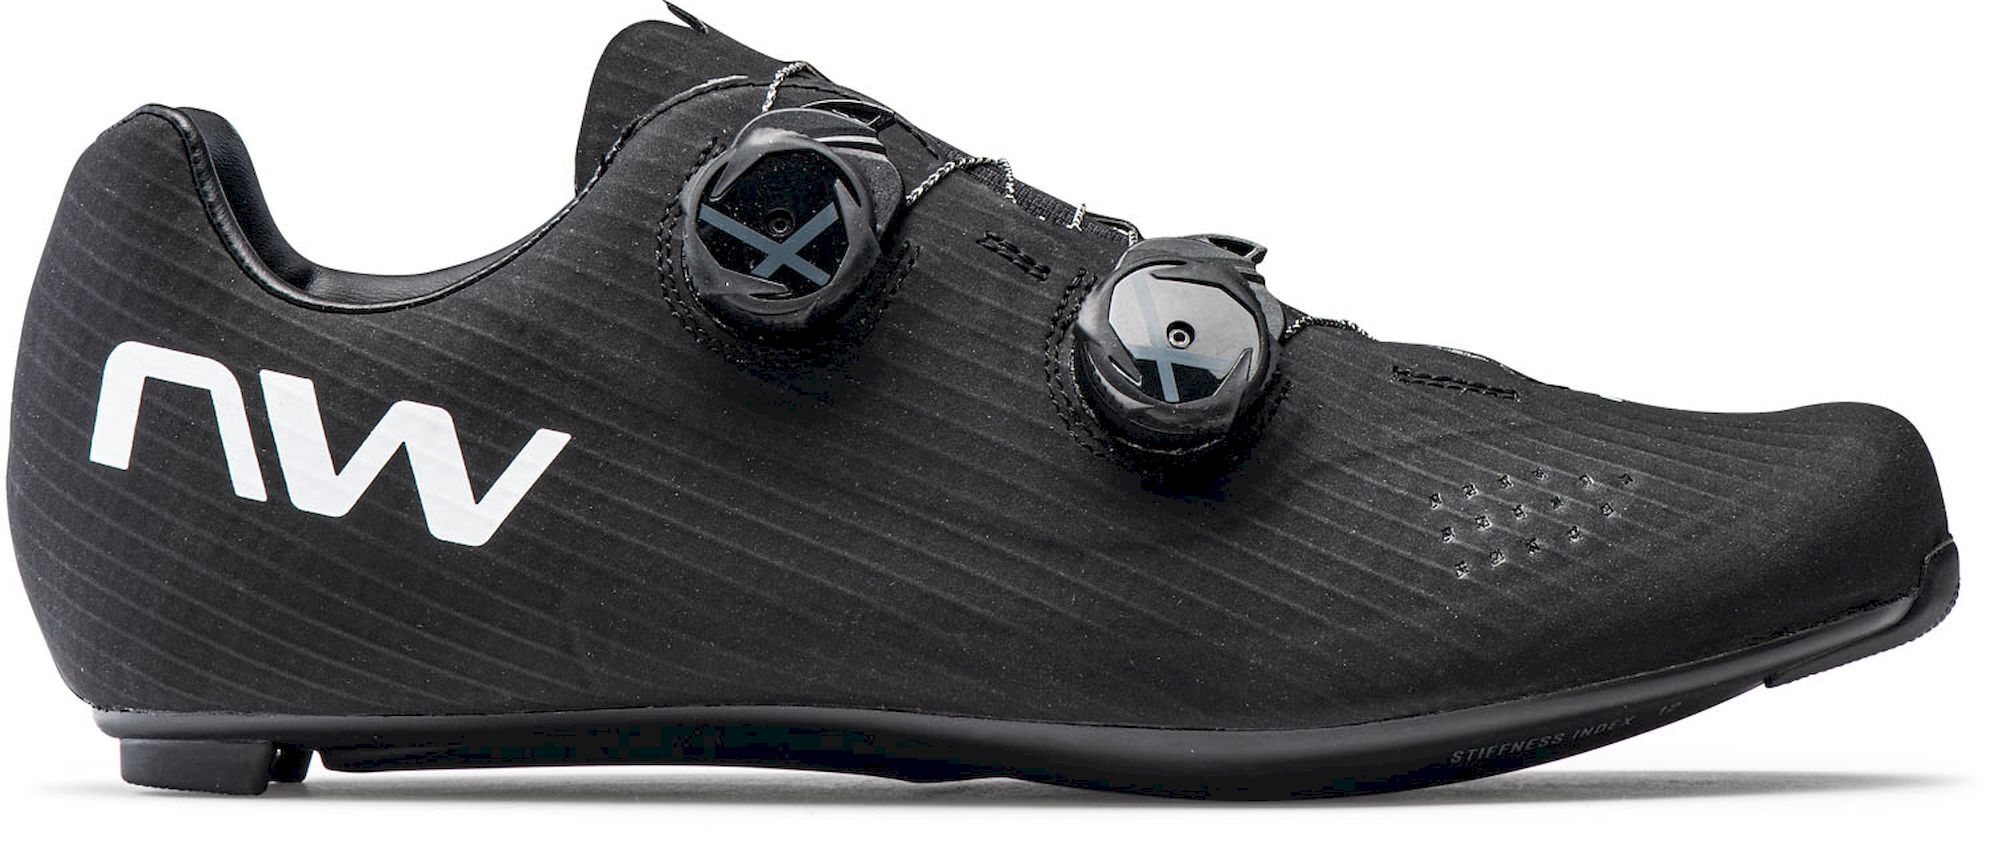 Northwave Extreme GT 4 - Chaussures vélo de route homme | Hardloop